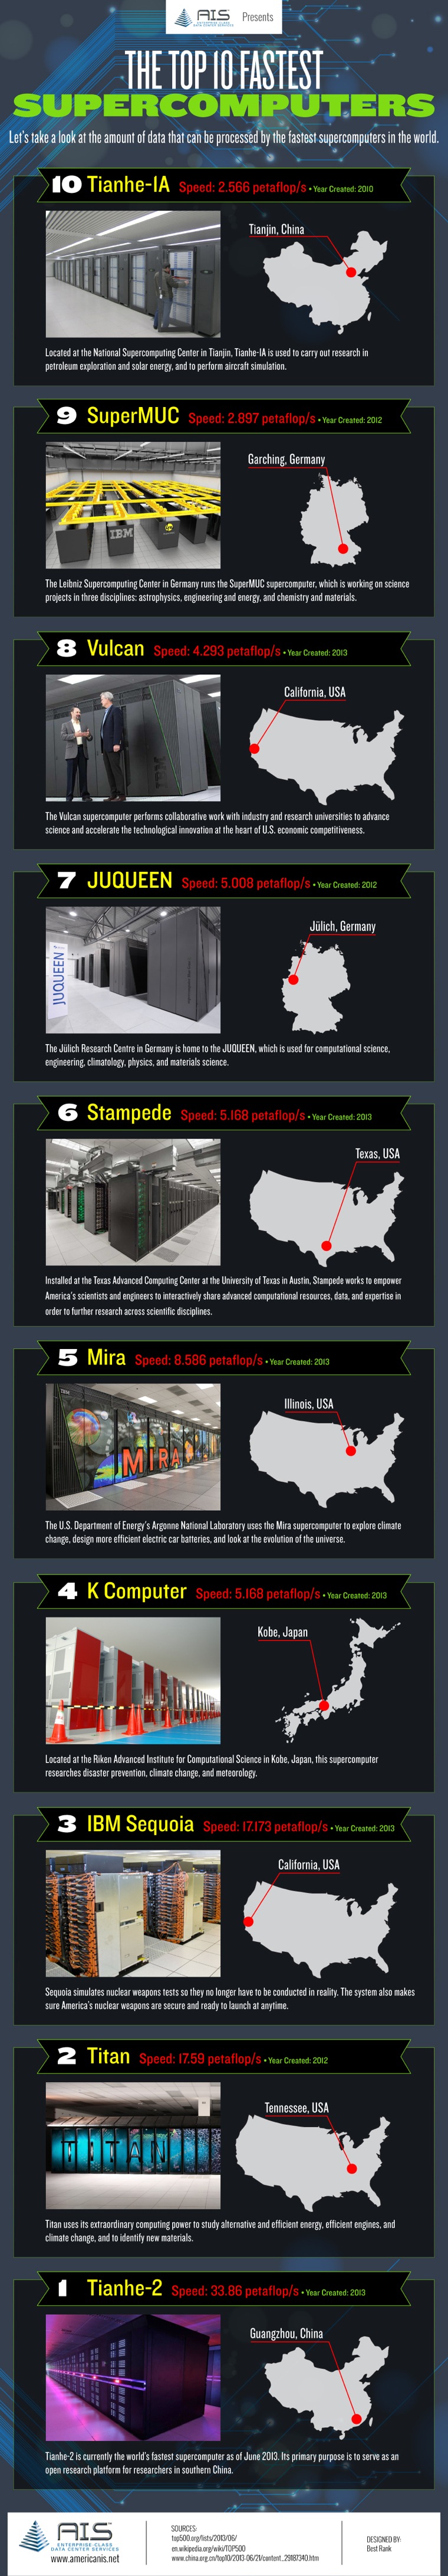 World's 10 Fastest Supercomputers Infographic